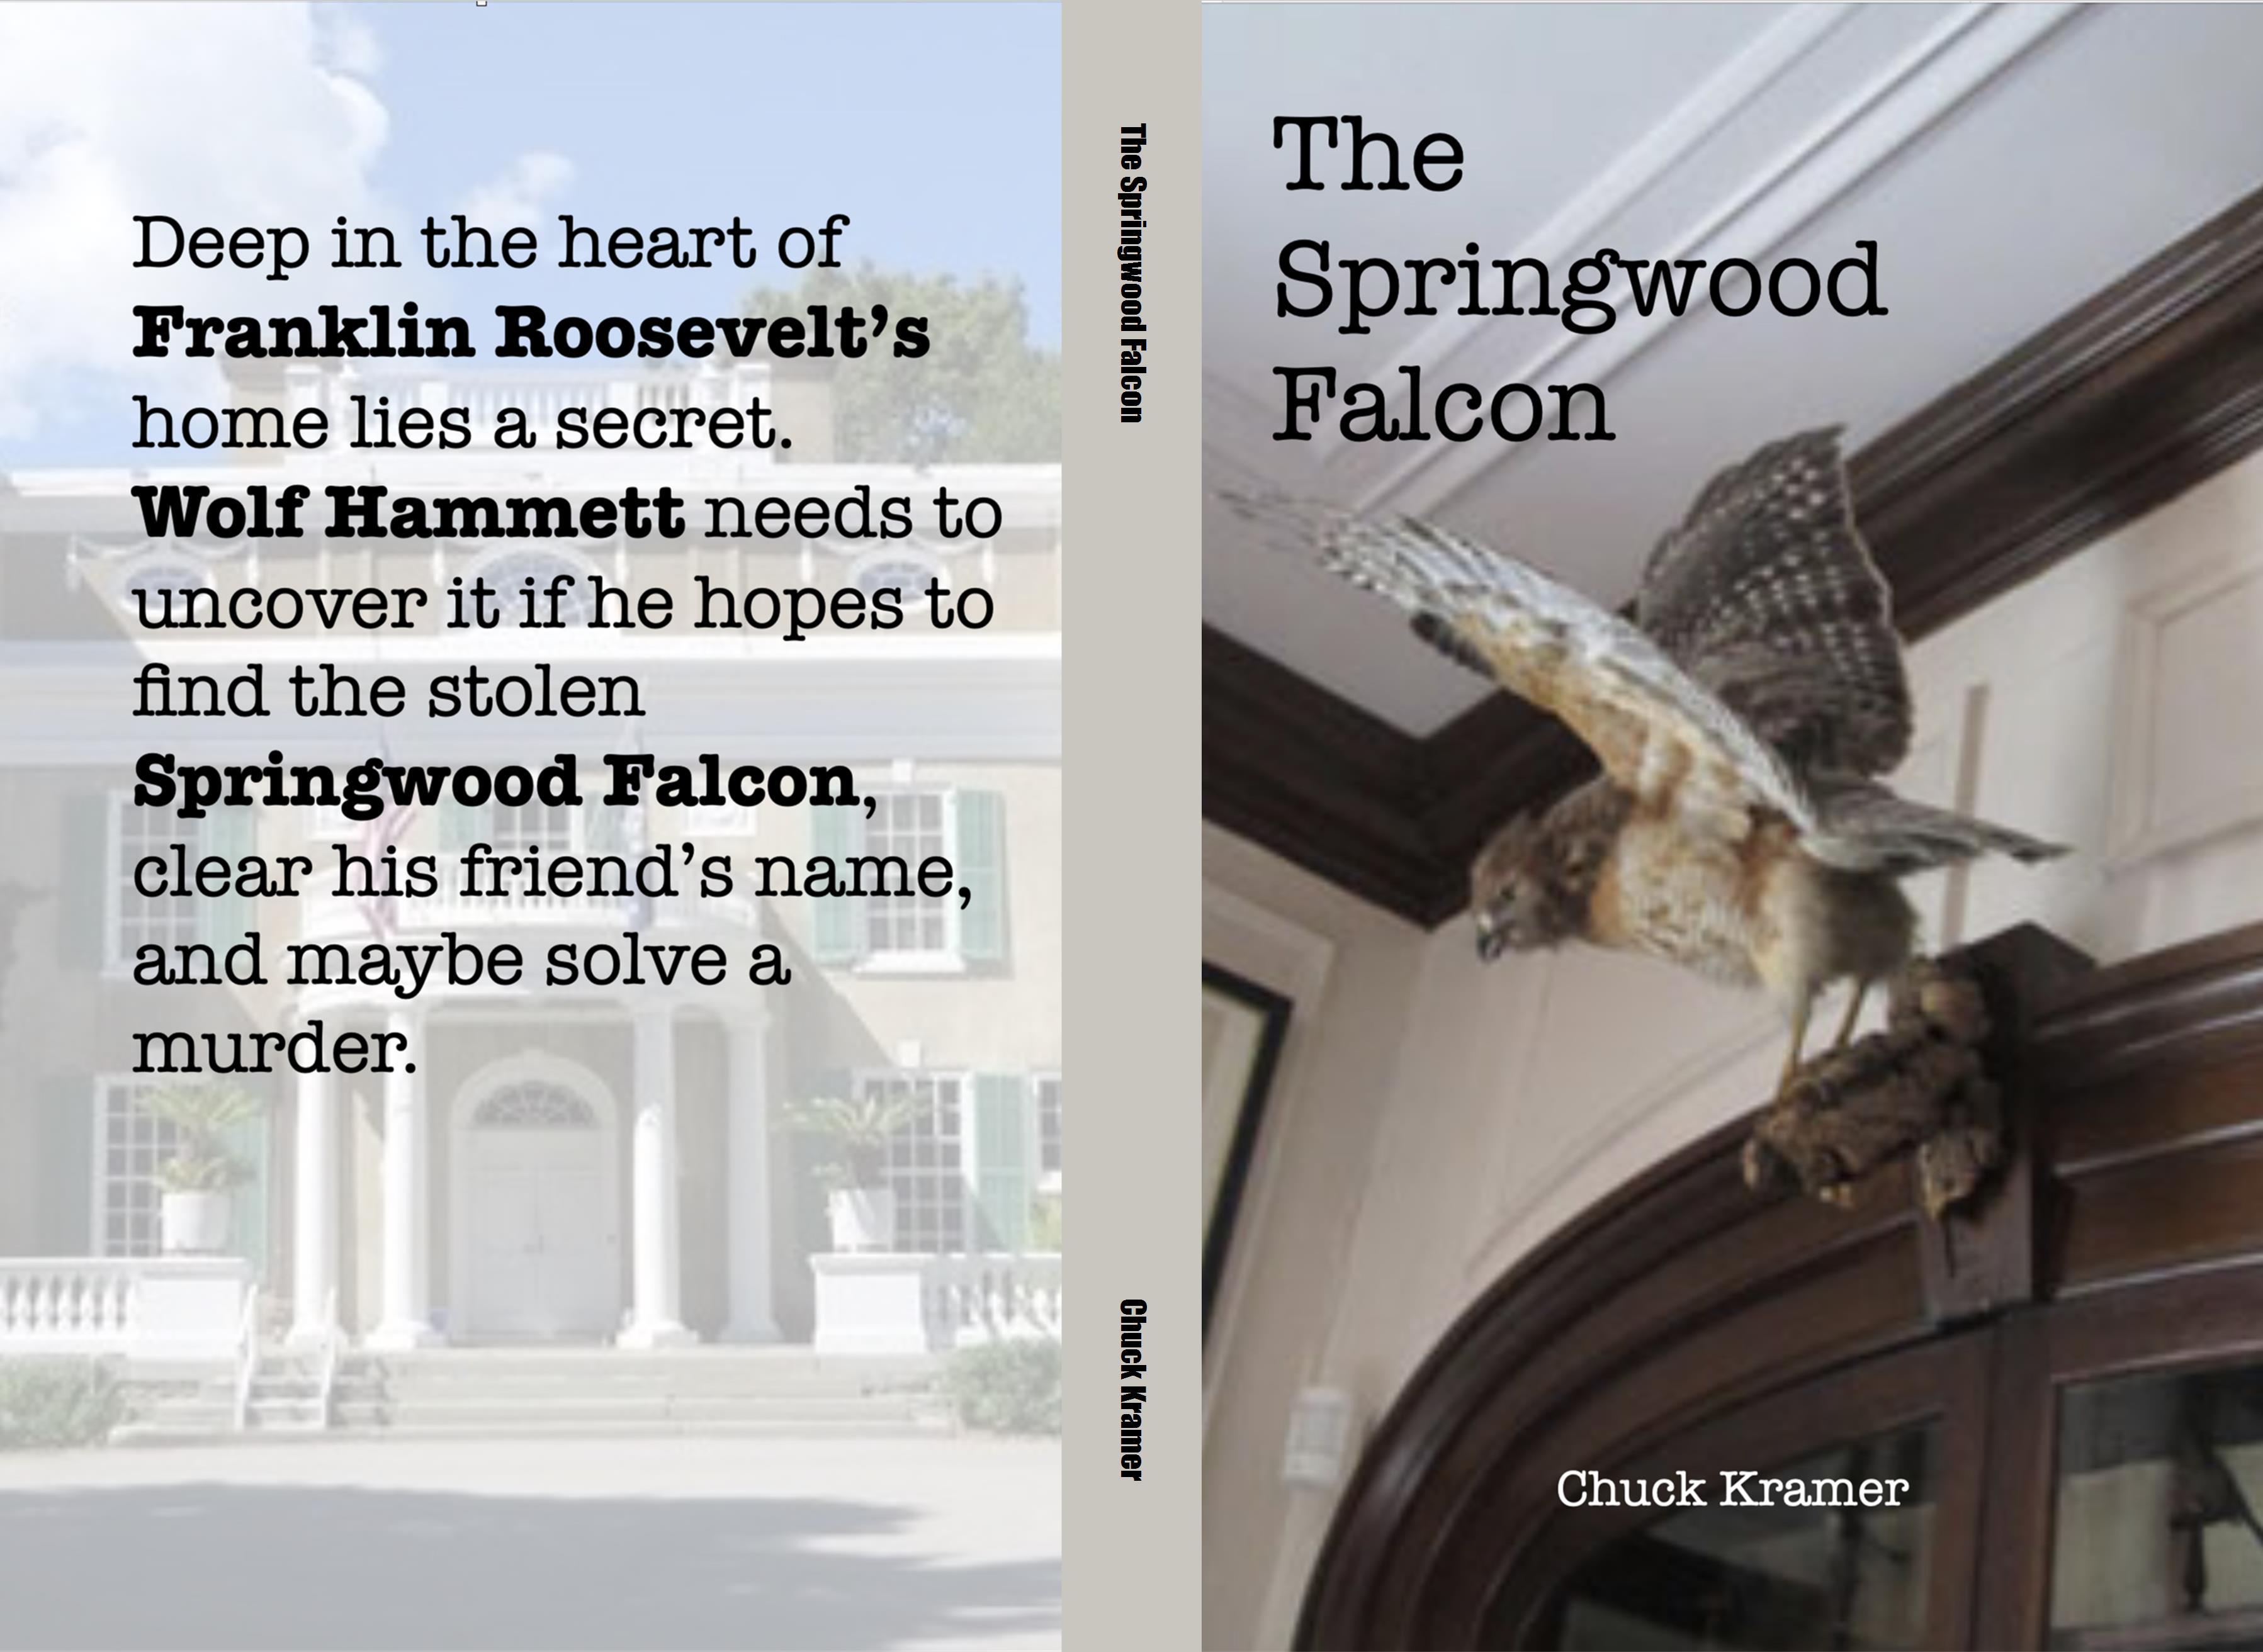 The Springwood Falcon cover image